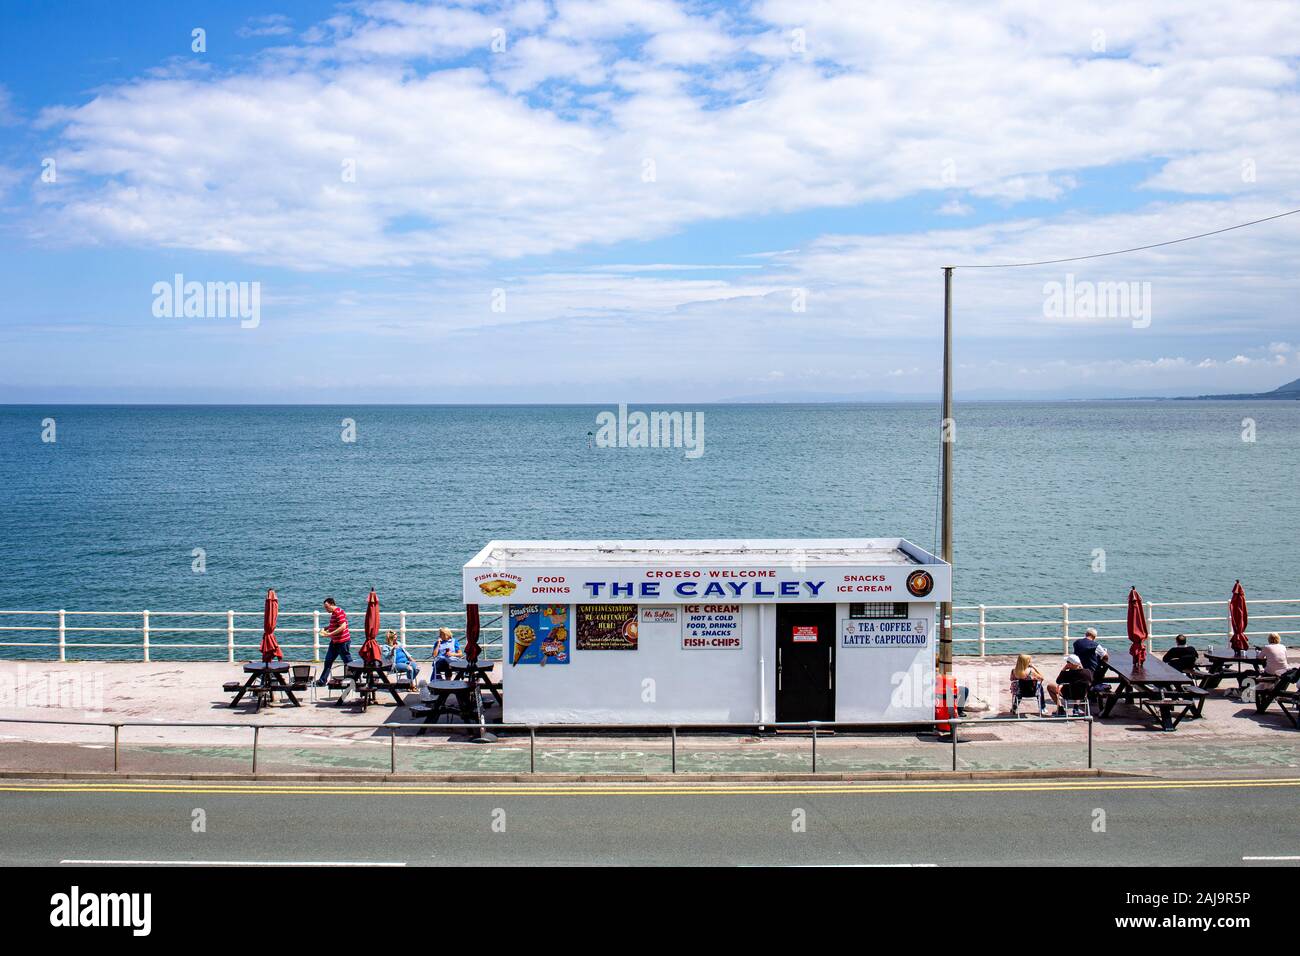 The Cayley, fish and chips shop on the promenade in Rhos-on-Sea Wales UK Stock Photo